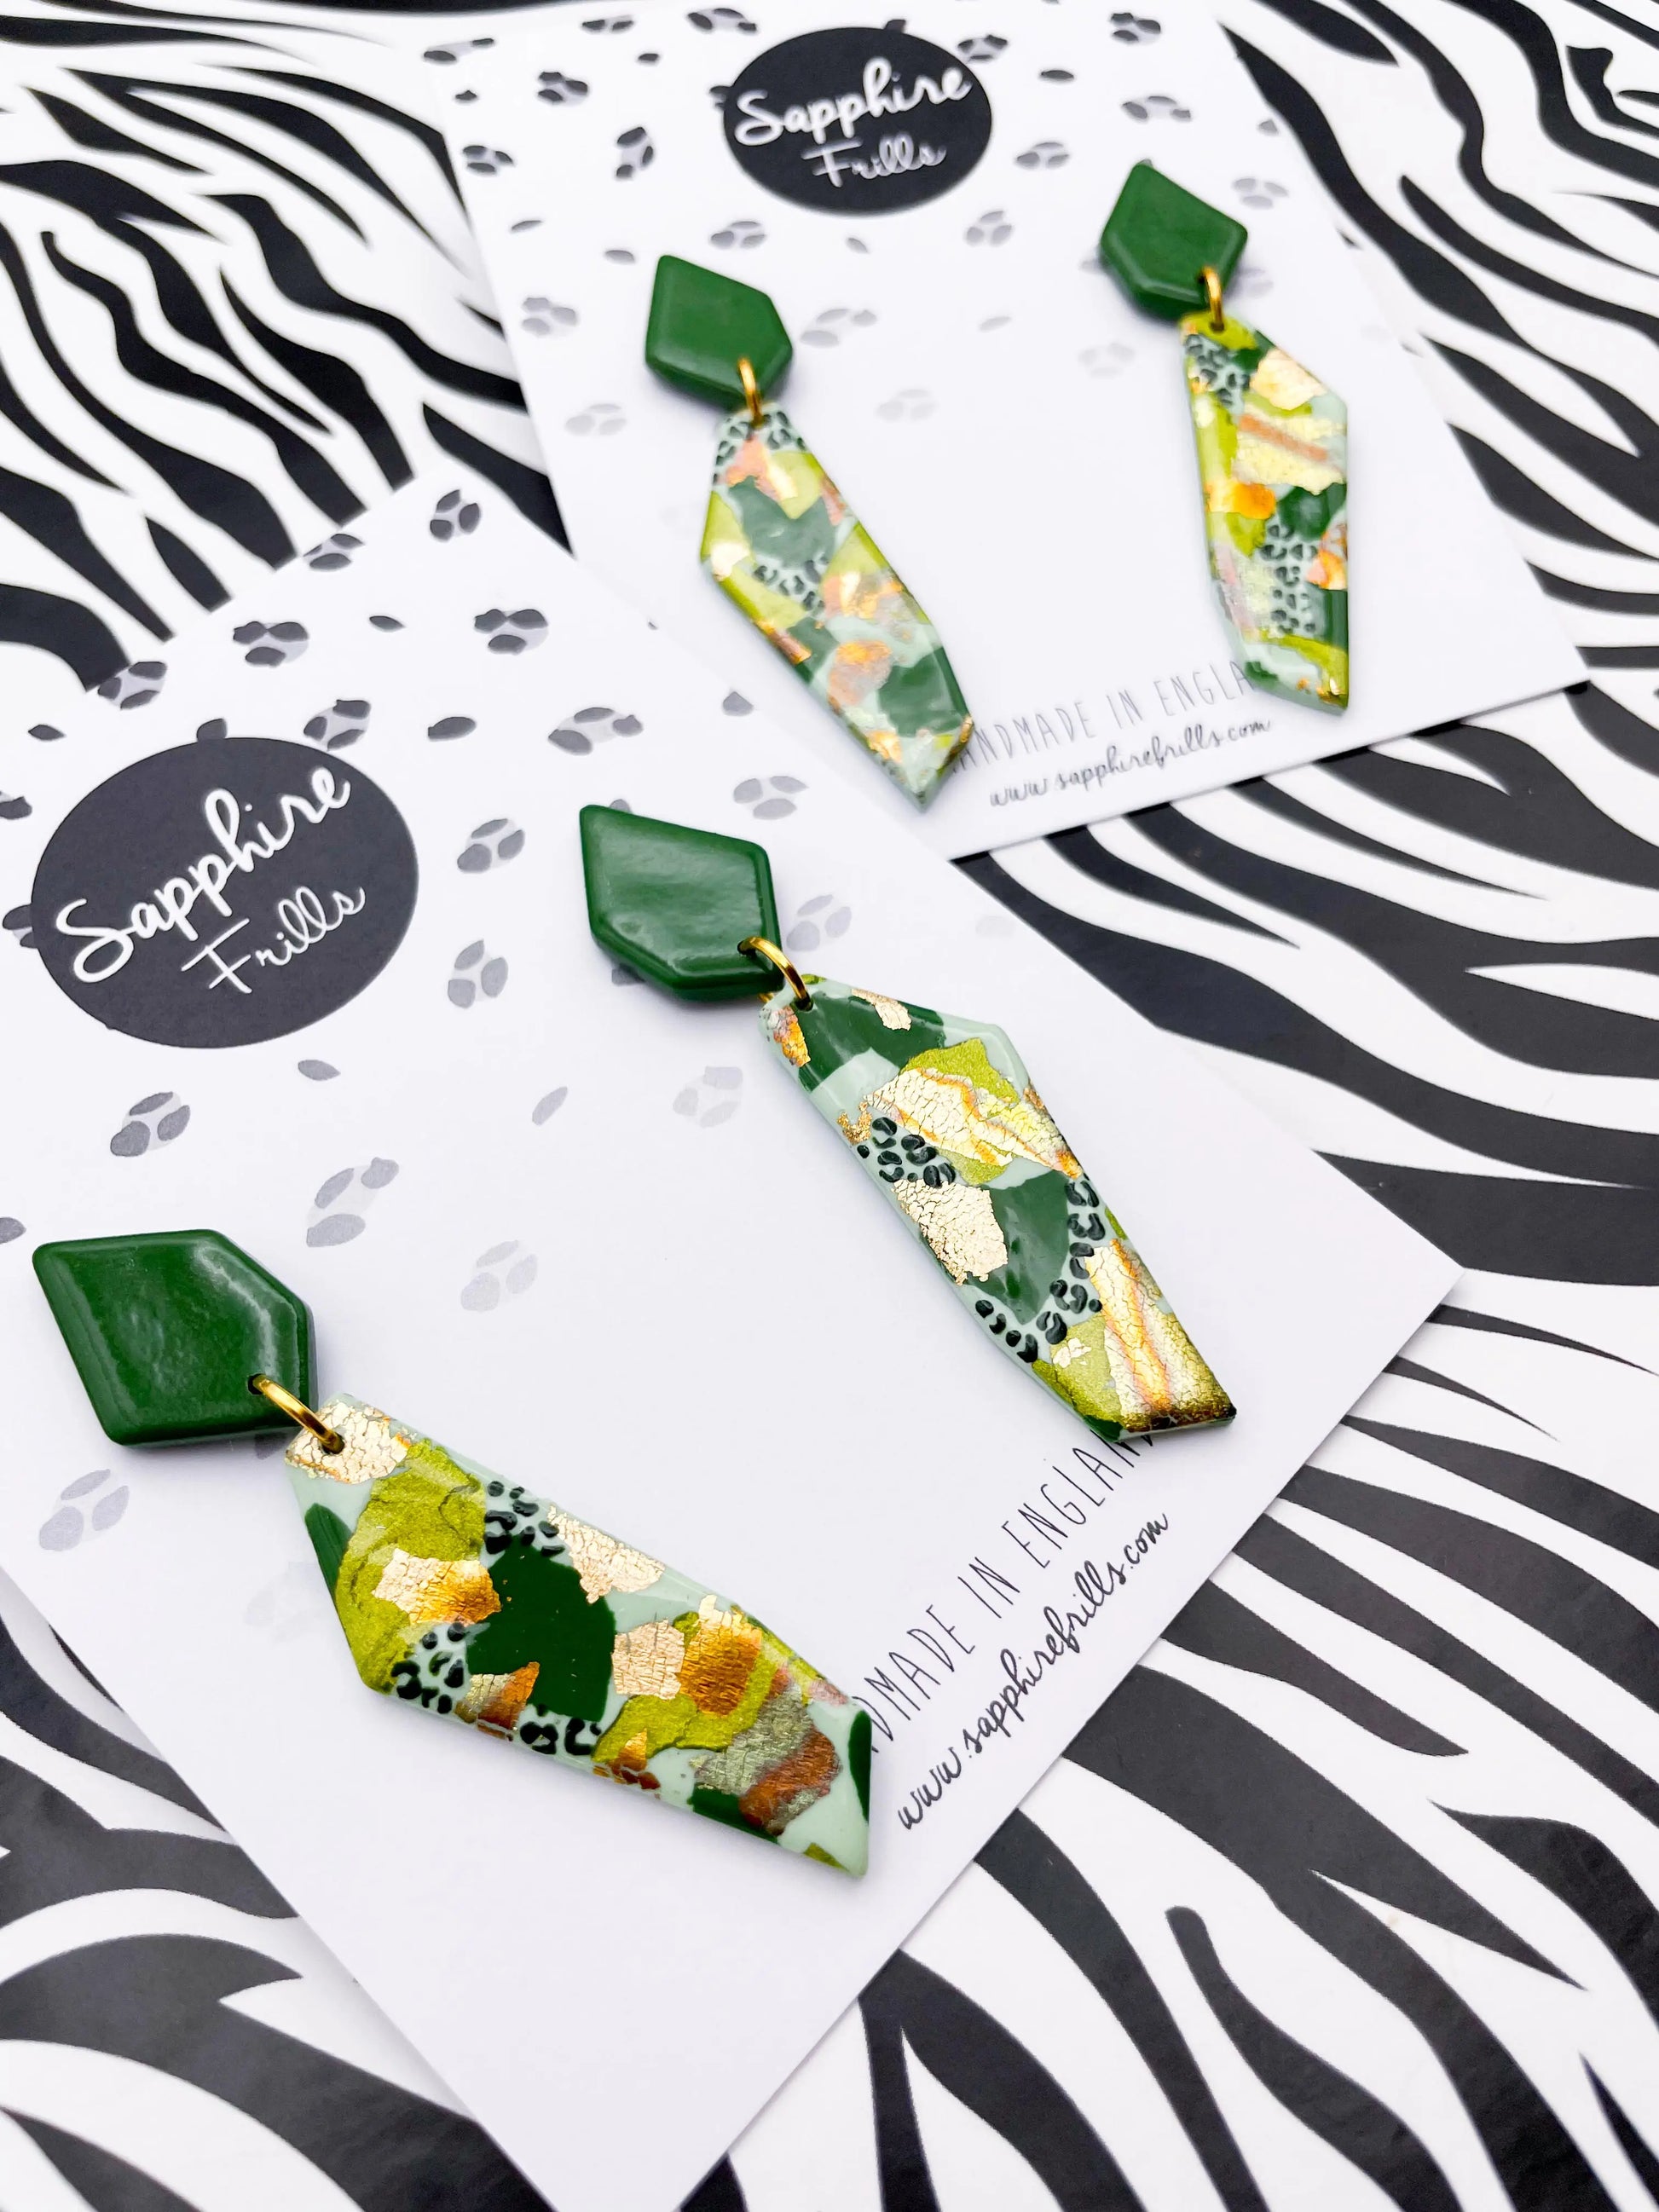 Green Smudge Print with Snake Print Foil Jungle Leopard Print Stone Dangle Earrings from Sapphire Frills